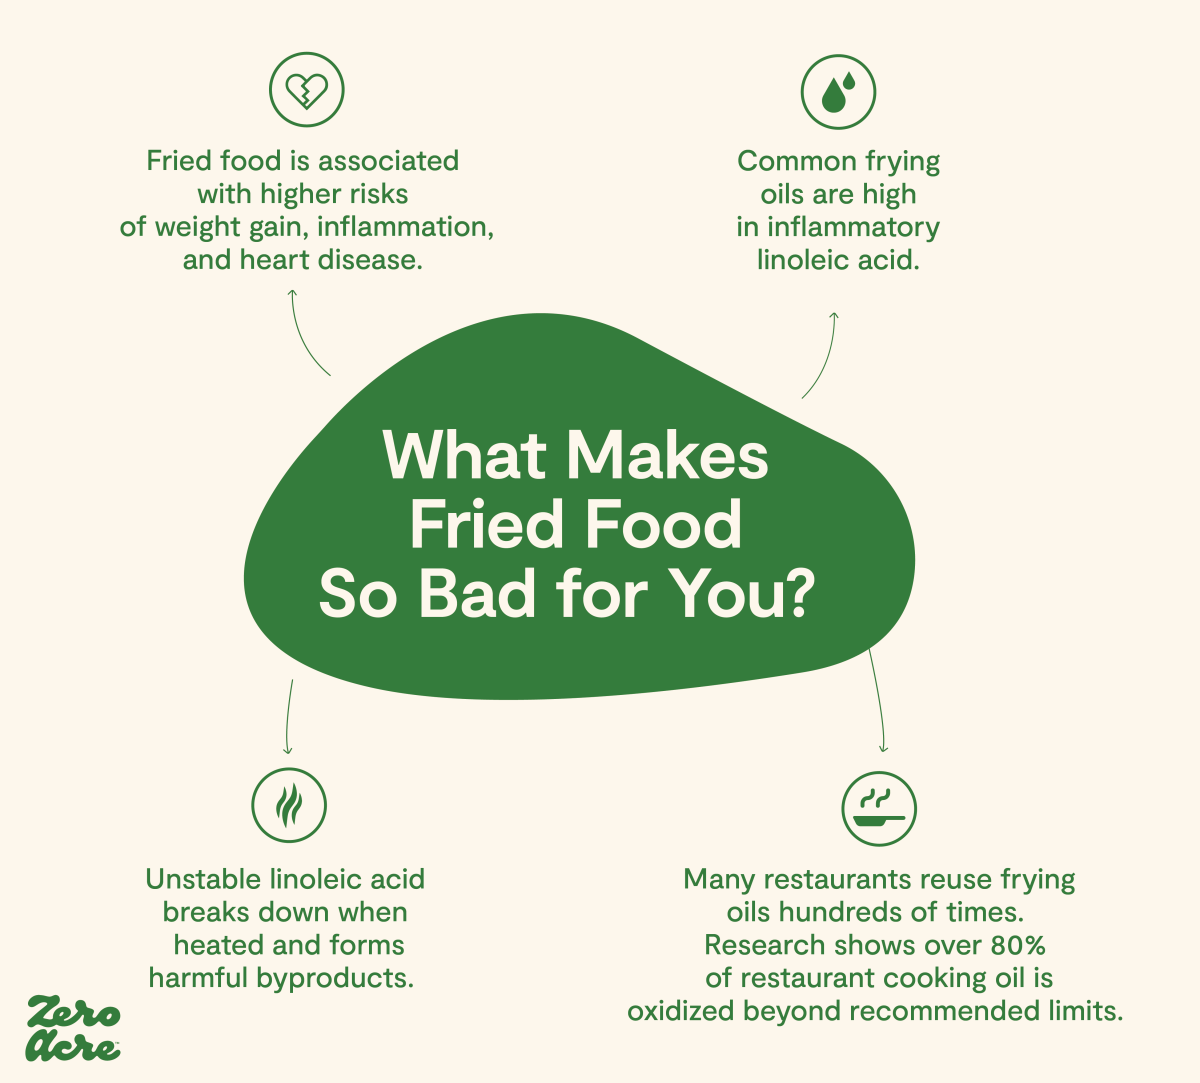 https://images.ctfassets.net/stnv4edzz8v3/4YVp36eehkRAg1ClhKKtaN/c3fc41c8bc9129ad53274c68ee5810a8/What_makes_fried_food_bad.png